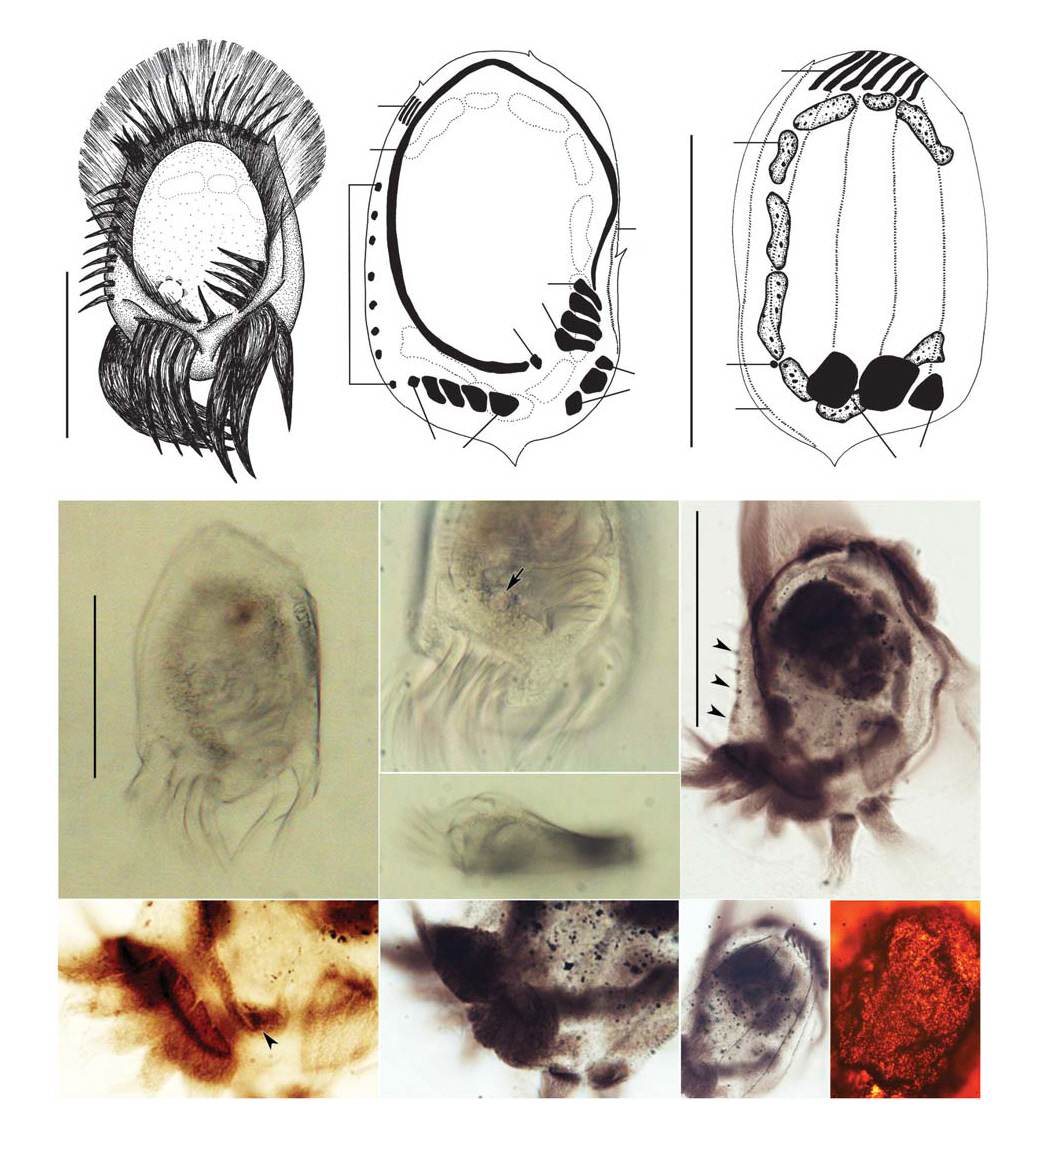 Morphological characteristics of Uronychia multicirrus. A Ventral view of a typical individual; B C The cirri pattern on the ventral (B) and dorsal (C) side drawn from protargol stained specimens; D-F Living specimens shows CV (arrow in E) and lateral side (F); G Ventral region views Ma several VC (arrowheads) and PM; H I Posterior region shows AZM2 BC (arrowhead in H)CC DK and TC; J K Dorsal side views DK (J) and silverline system (K). AZM adoral zone of membranelles; BC buccal cirrus; CCcaudal cirri; DK dorsol kineties; FC frontal cirri; LMC left marginal cirri; Ma macronuclear nodule; Mi micronucleus; PM paroral membrane; TC transverse cirri; VC ventral cirri. Scale bars: 100 μm.